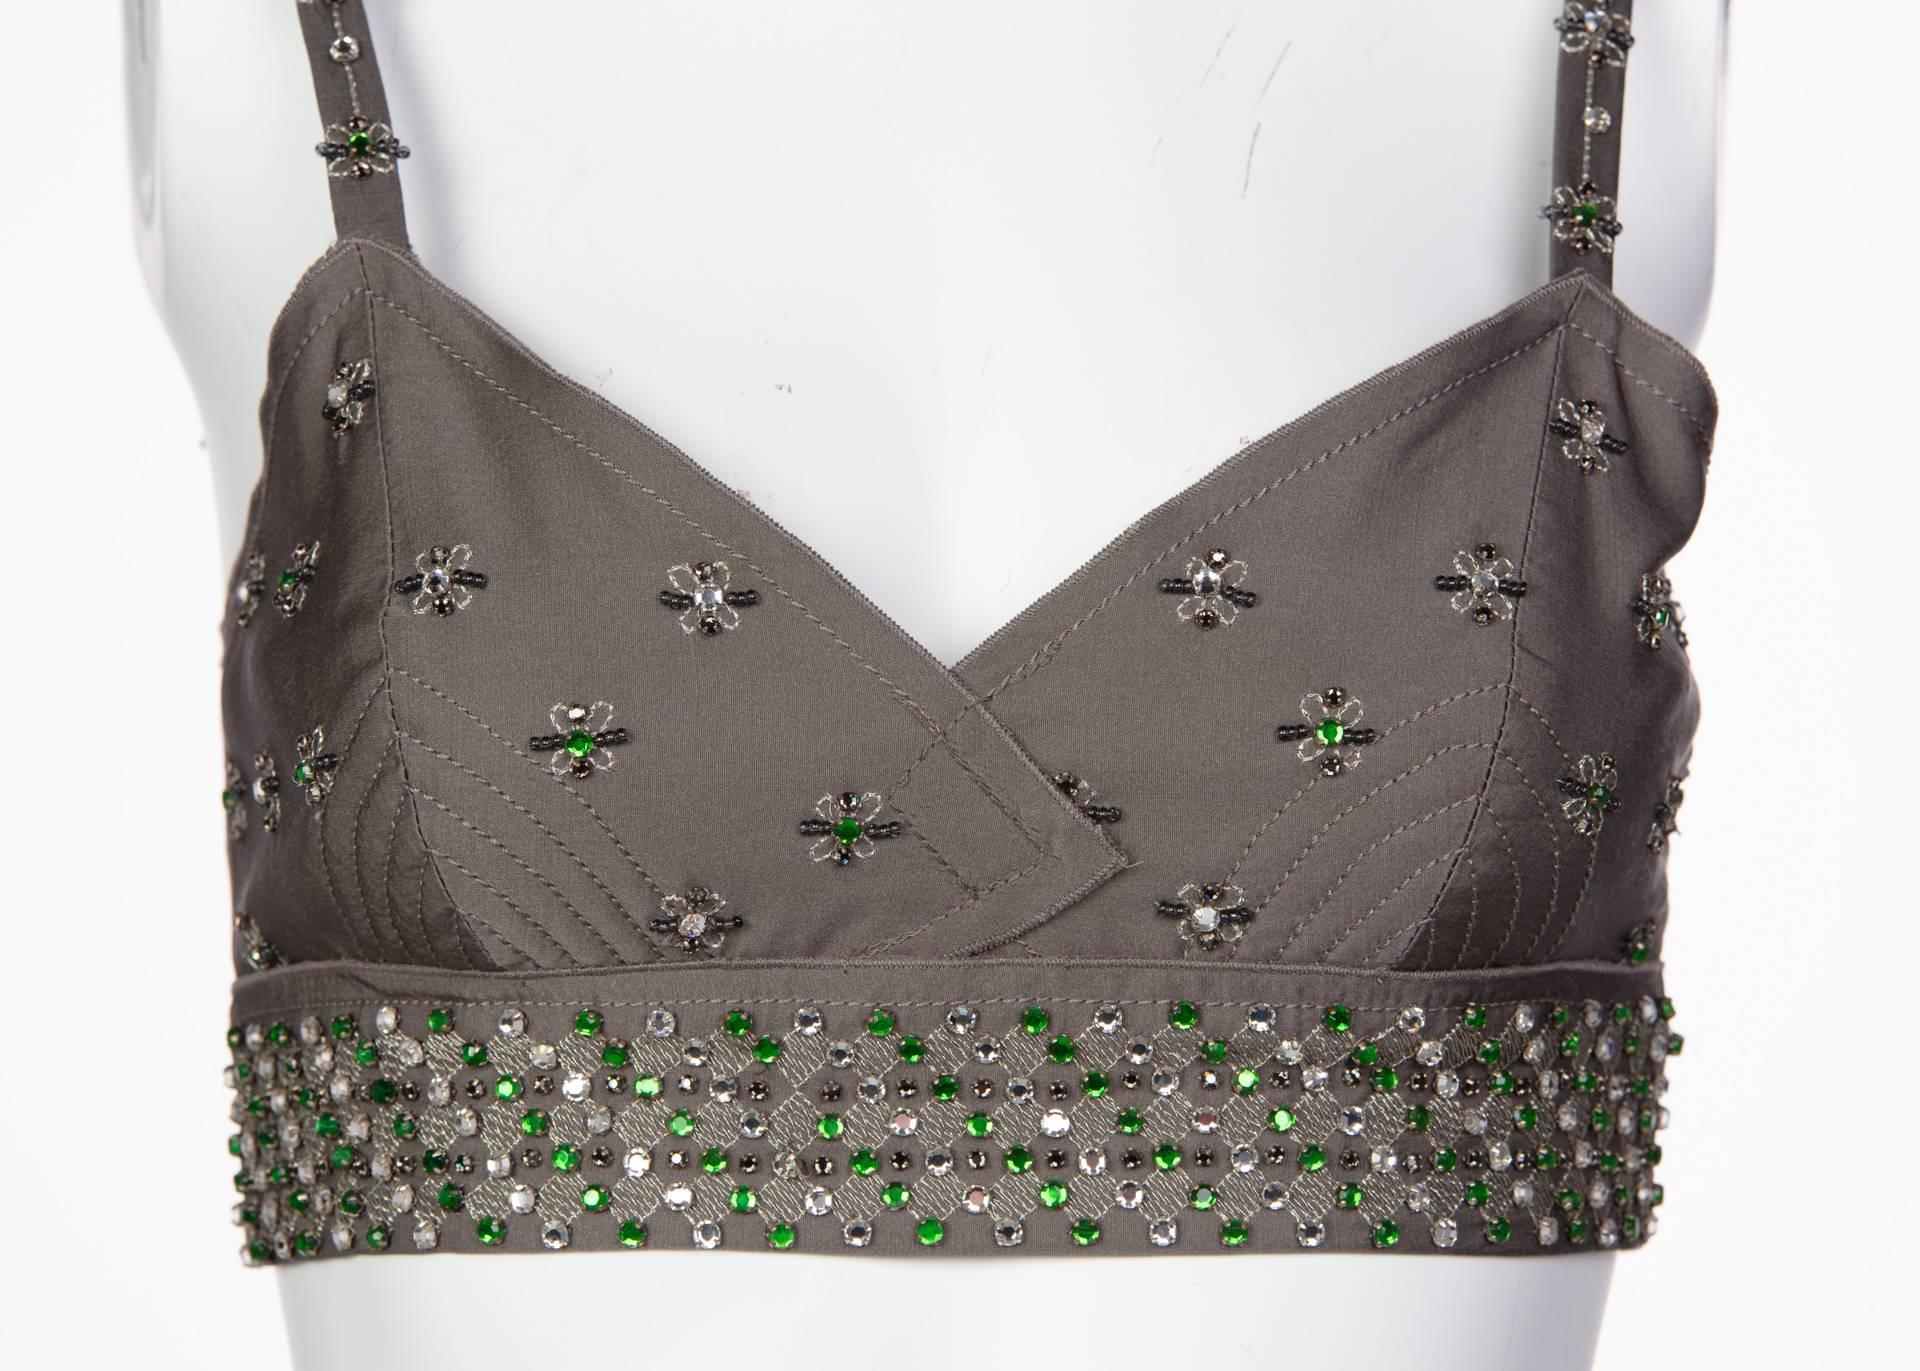   2000s Beaded Prada Bralette with Rhinestone Detail In Excellent Condition For Sale In Boca Raton, FL